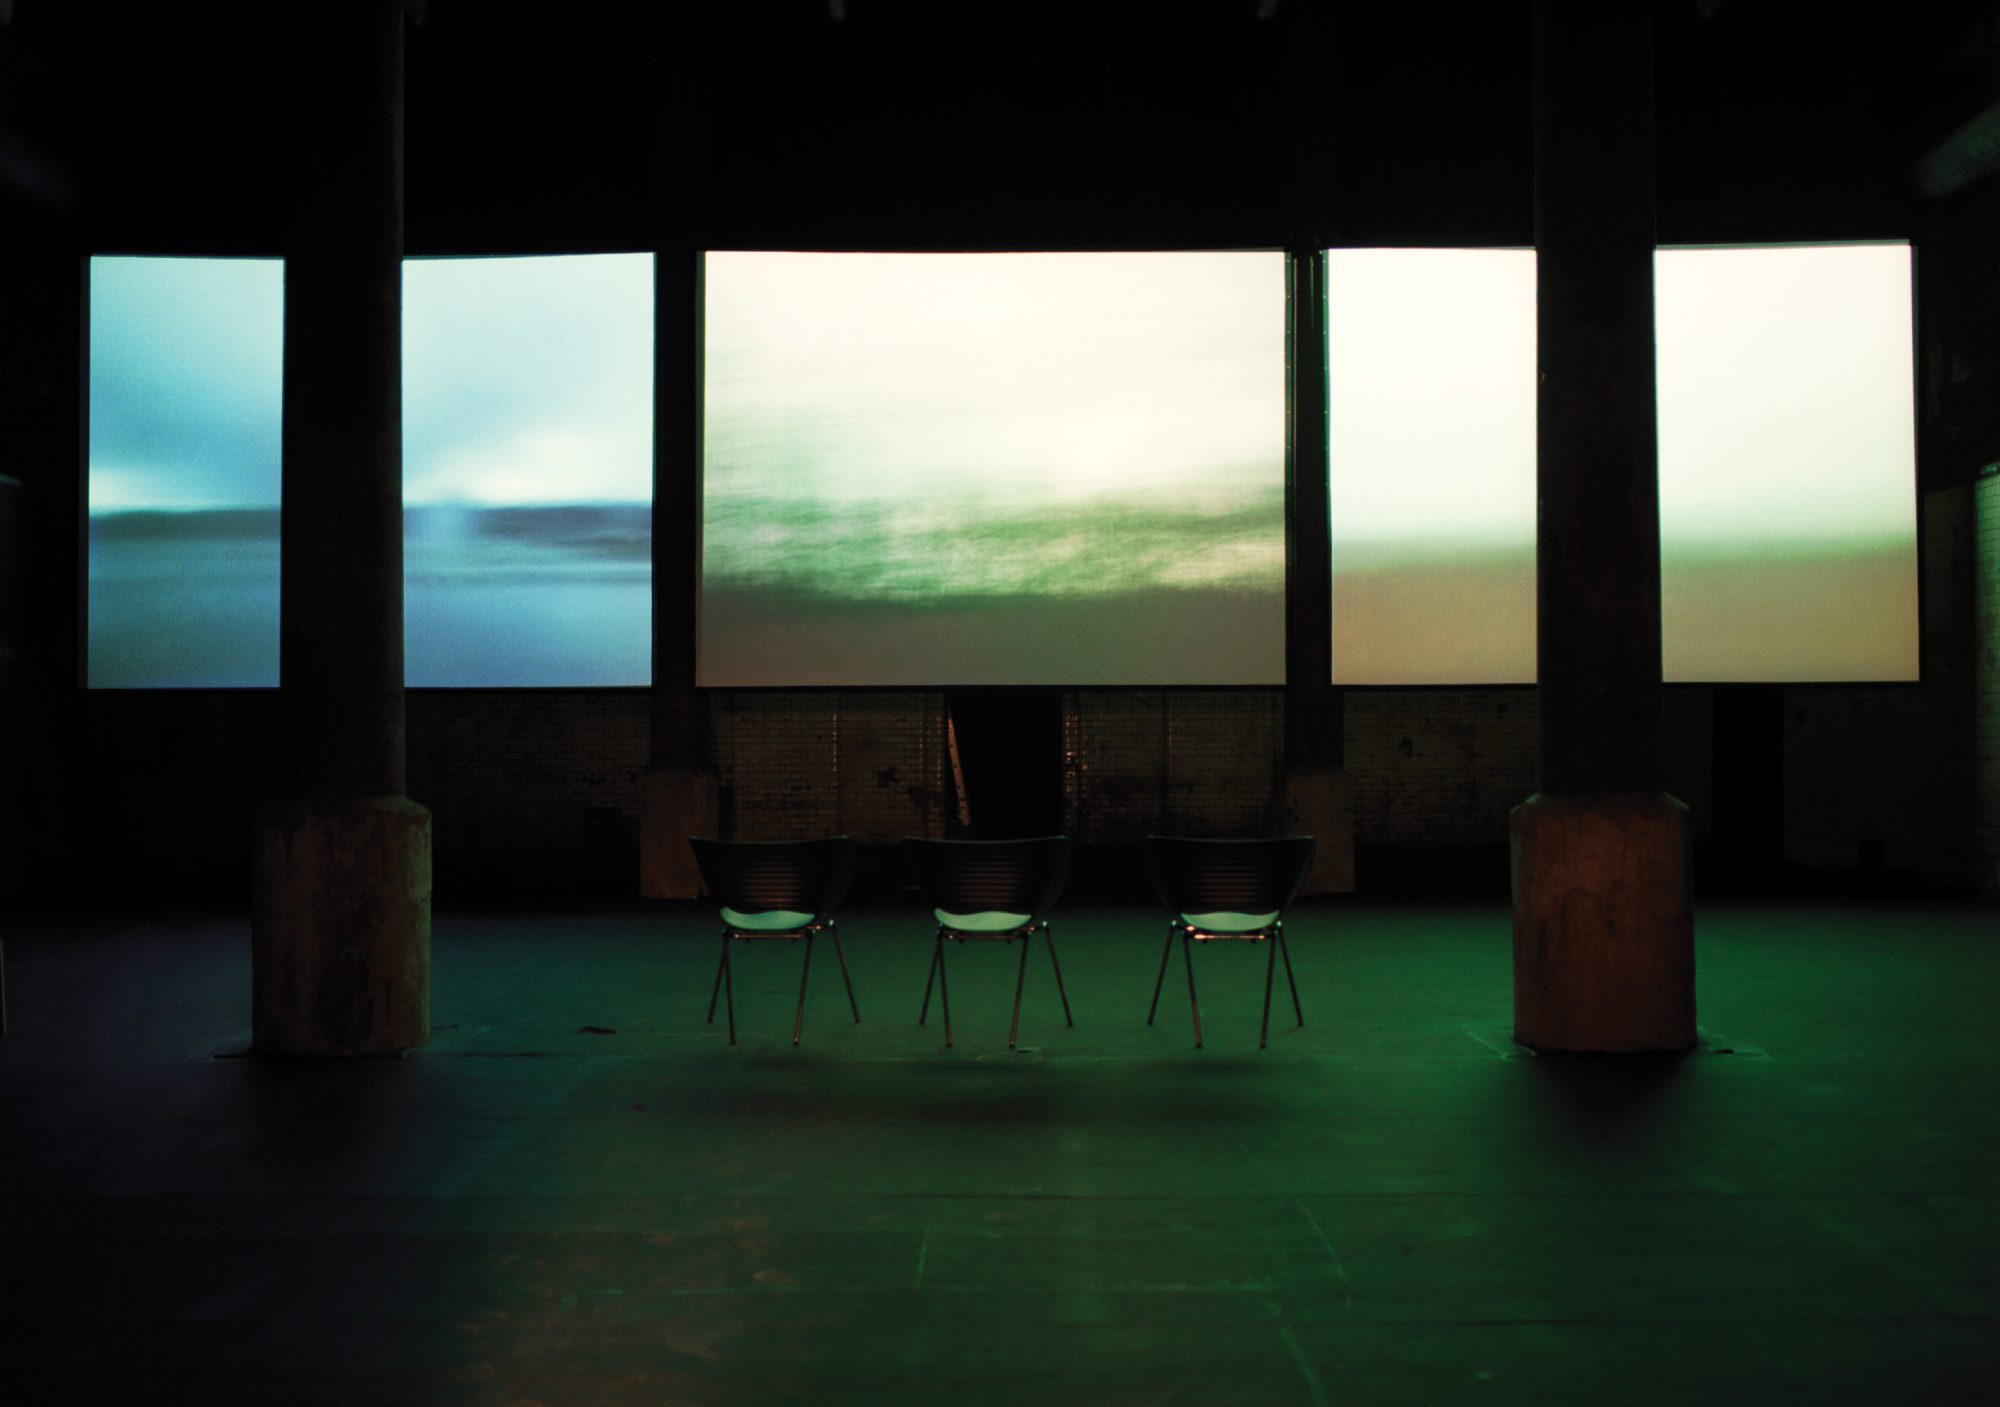 Spring, 2001, by Elina Brotherus. Installation view at Wapping Hydraulic Power Station